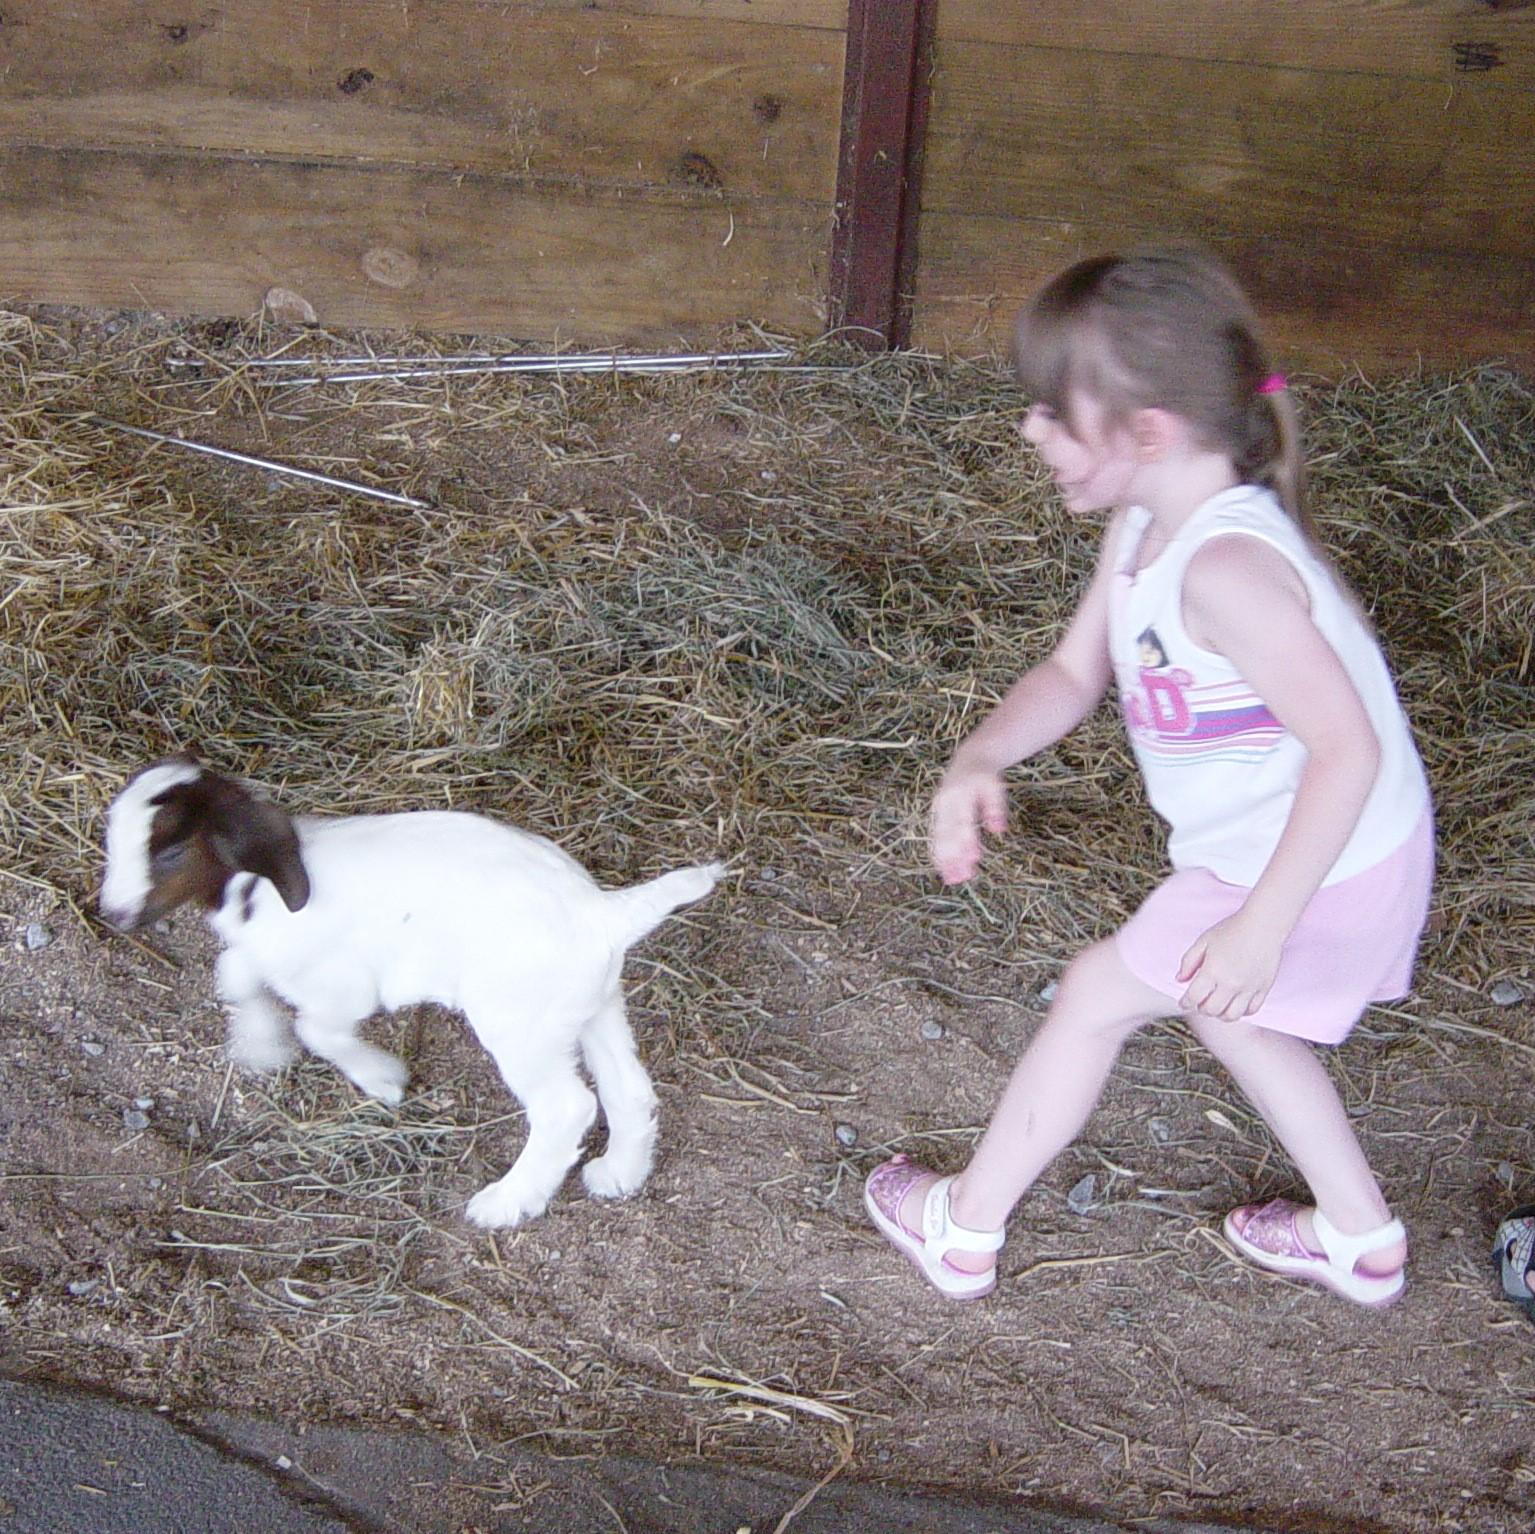 Little girl with goat